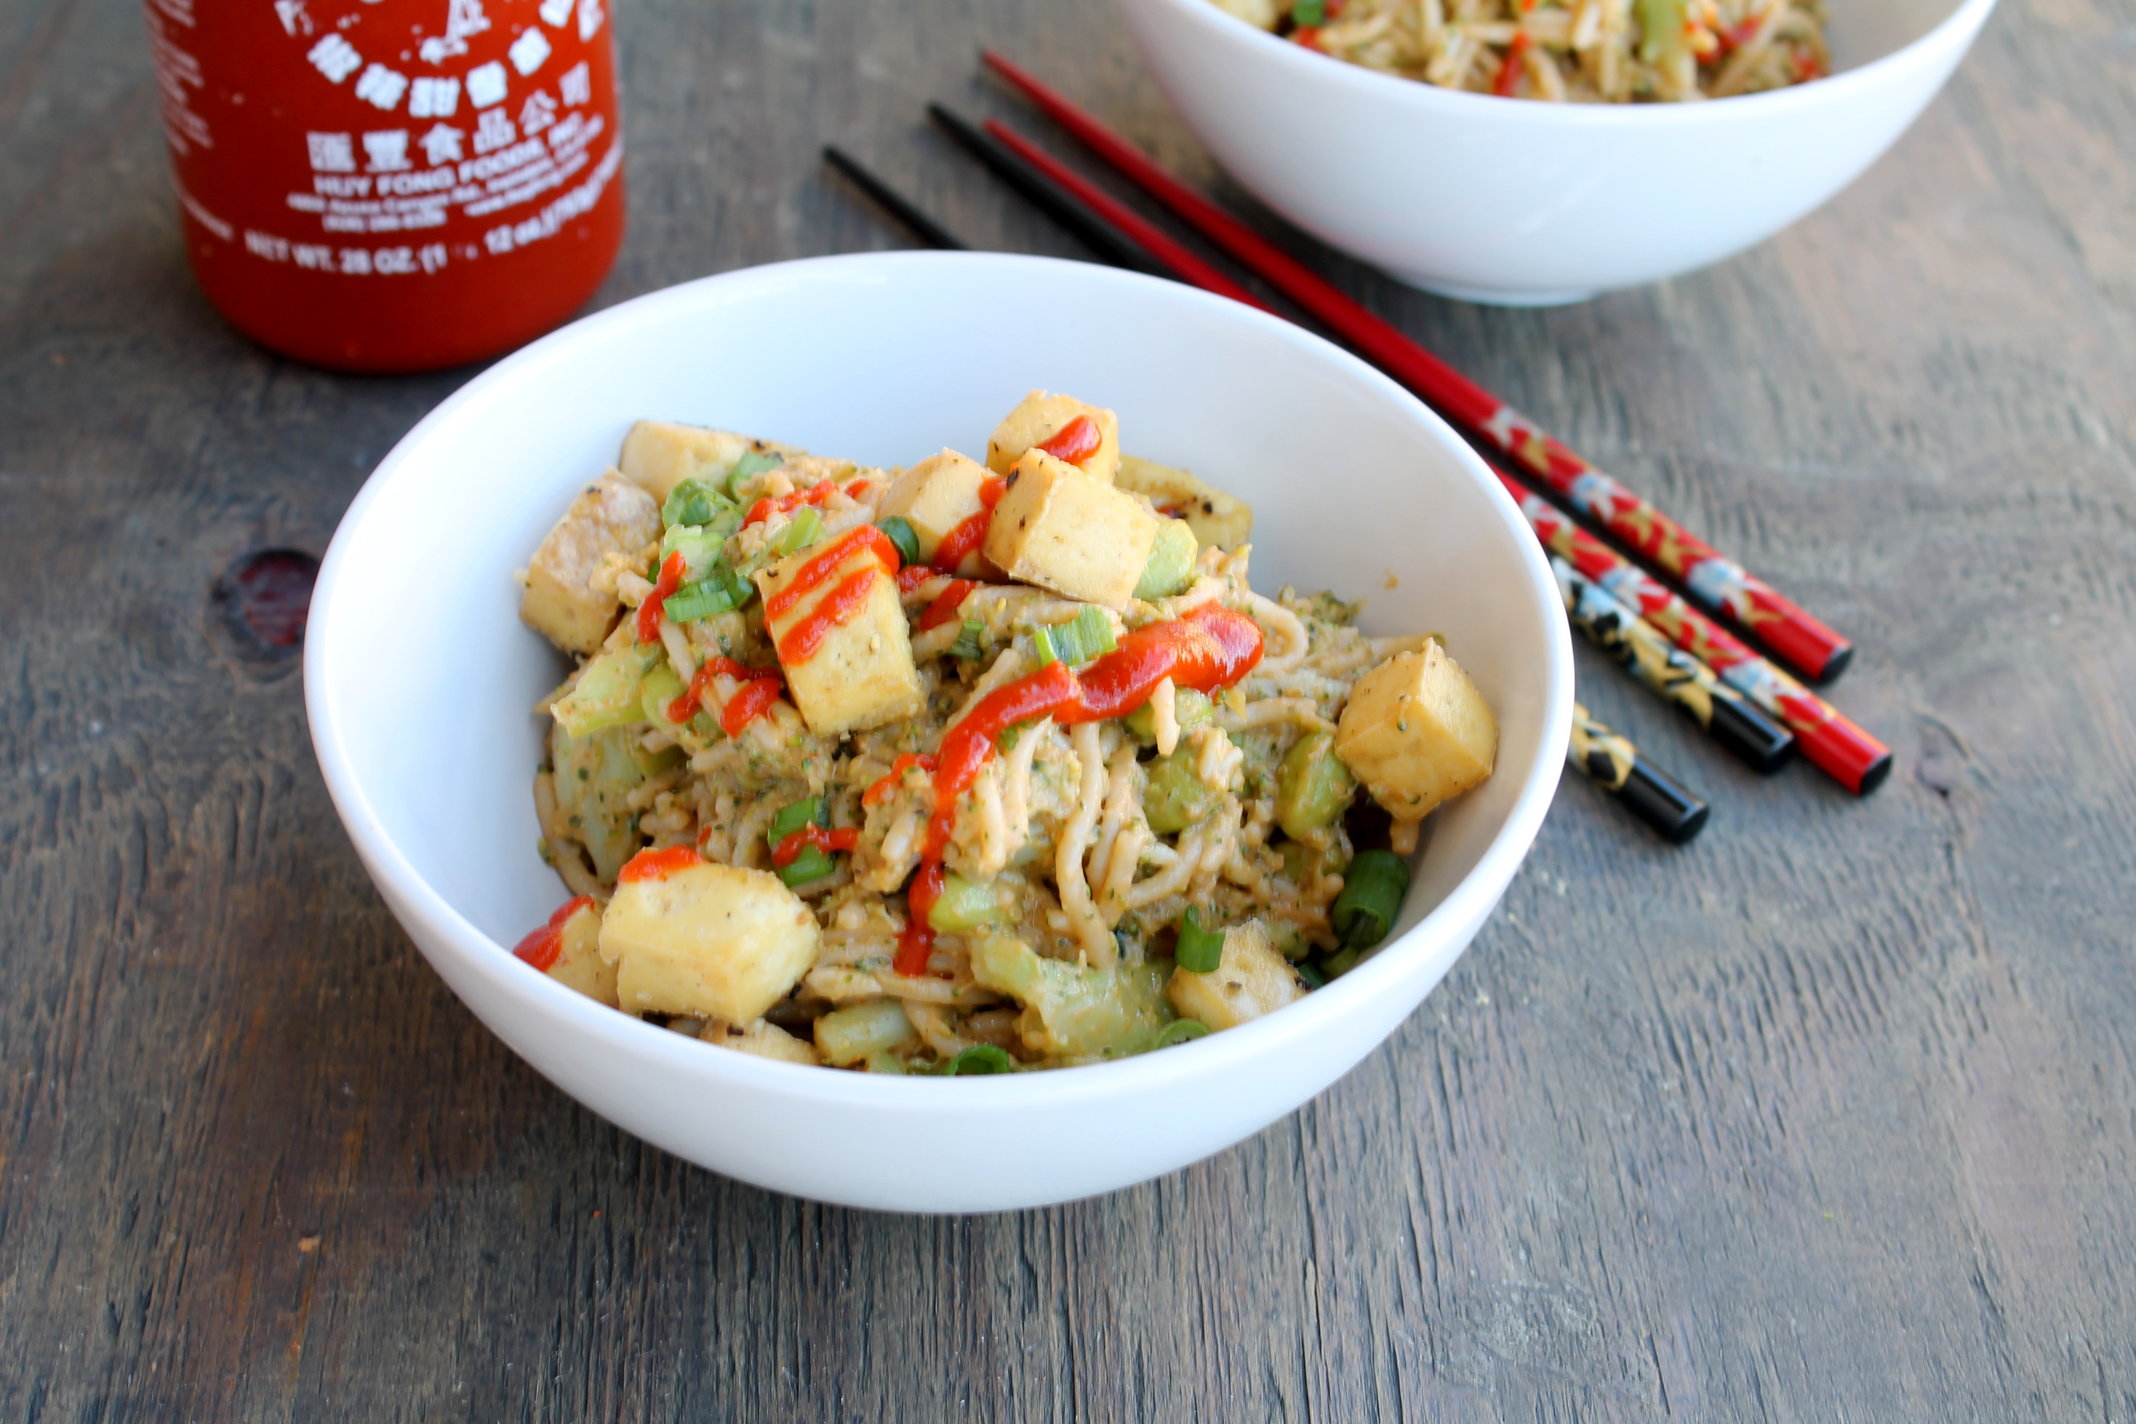 Peanut Butter Sriracha Noodles is perfect weeknight meal that is one pot, vegan and gluten-free friendly.